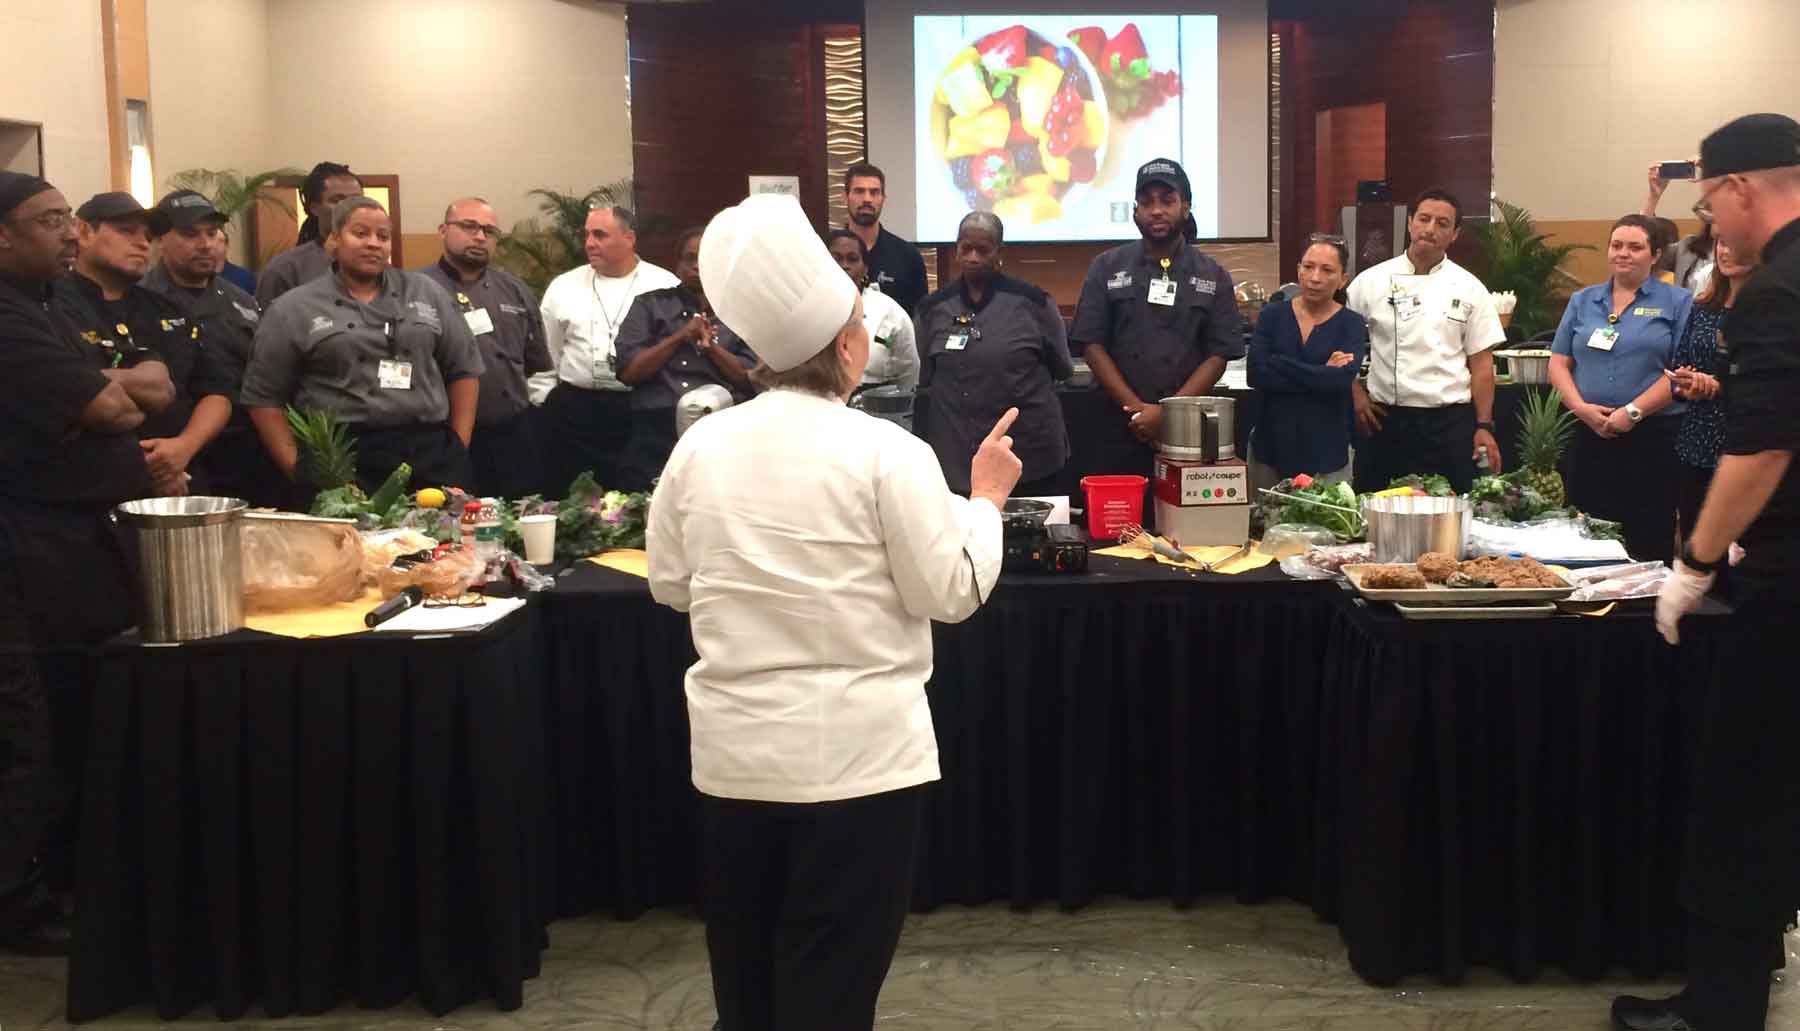 Baptist Health’s culinary teams receive dedicated training in plant-based cooking